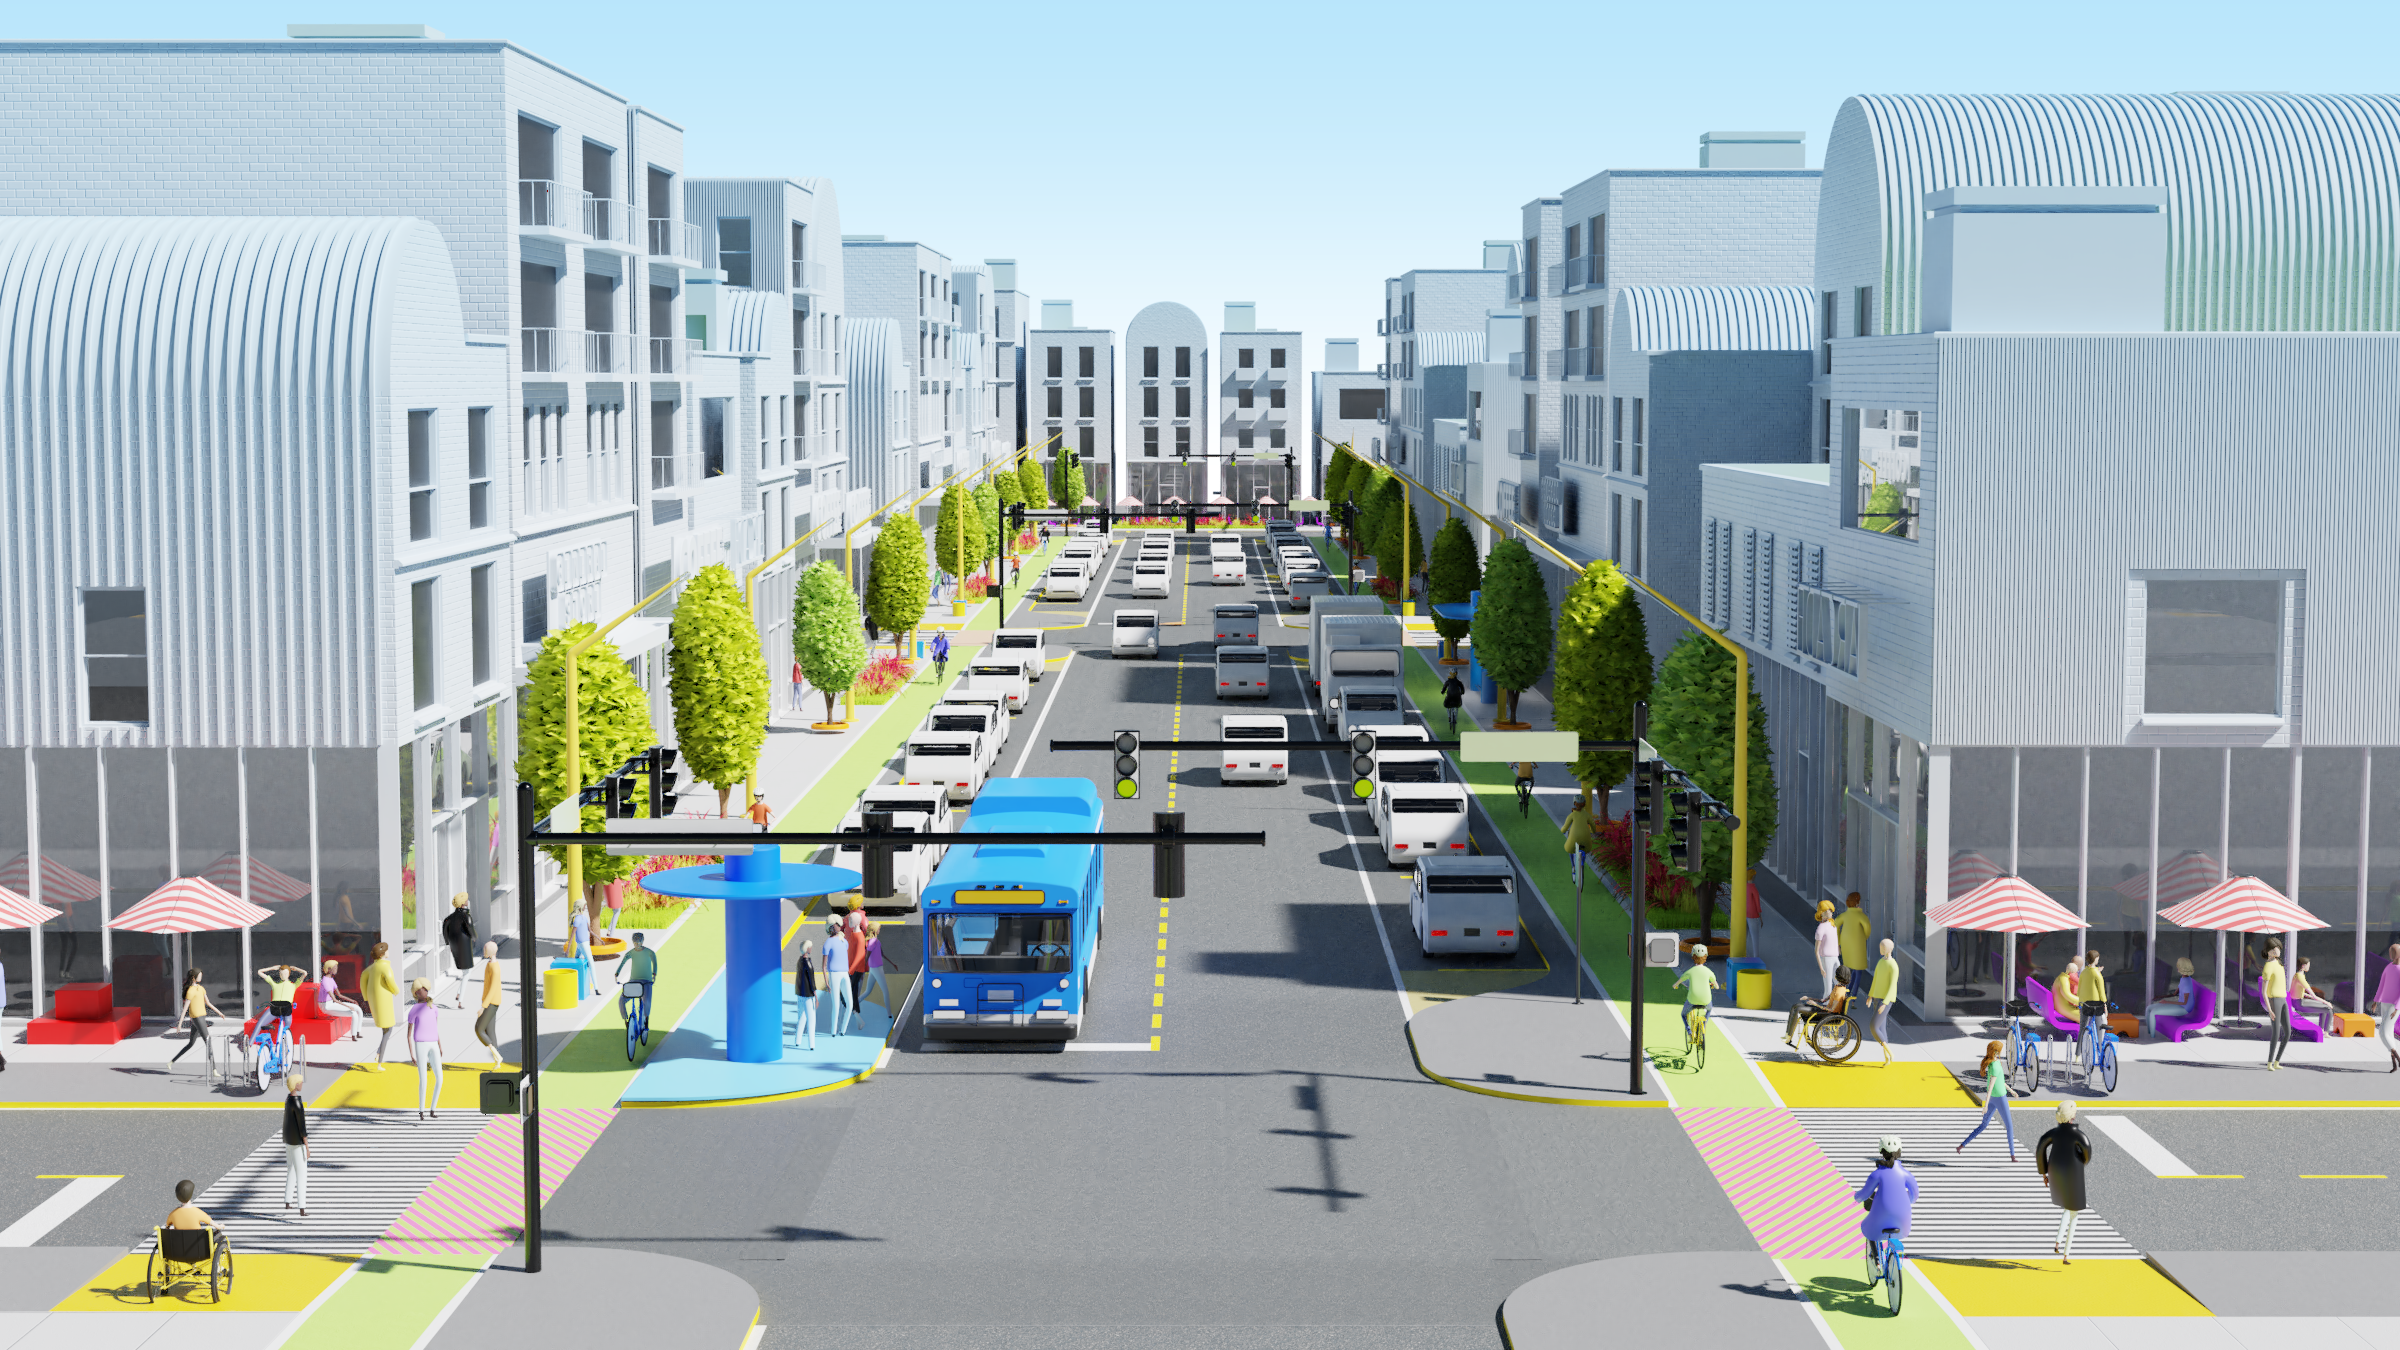 Adaptations to increase walkability with hot spots